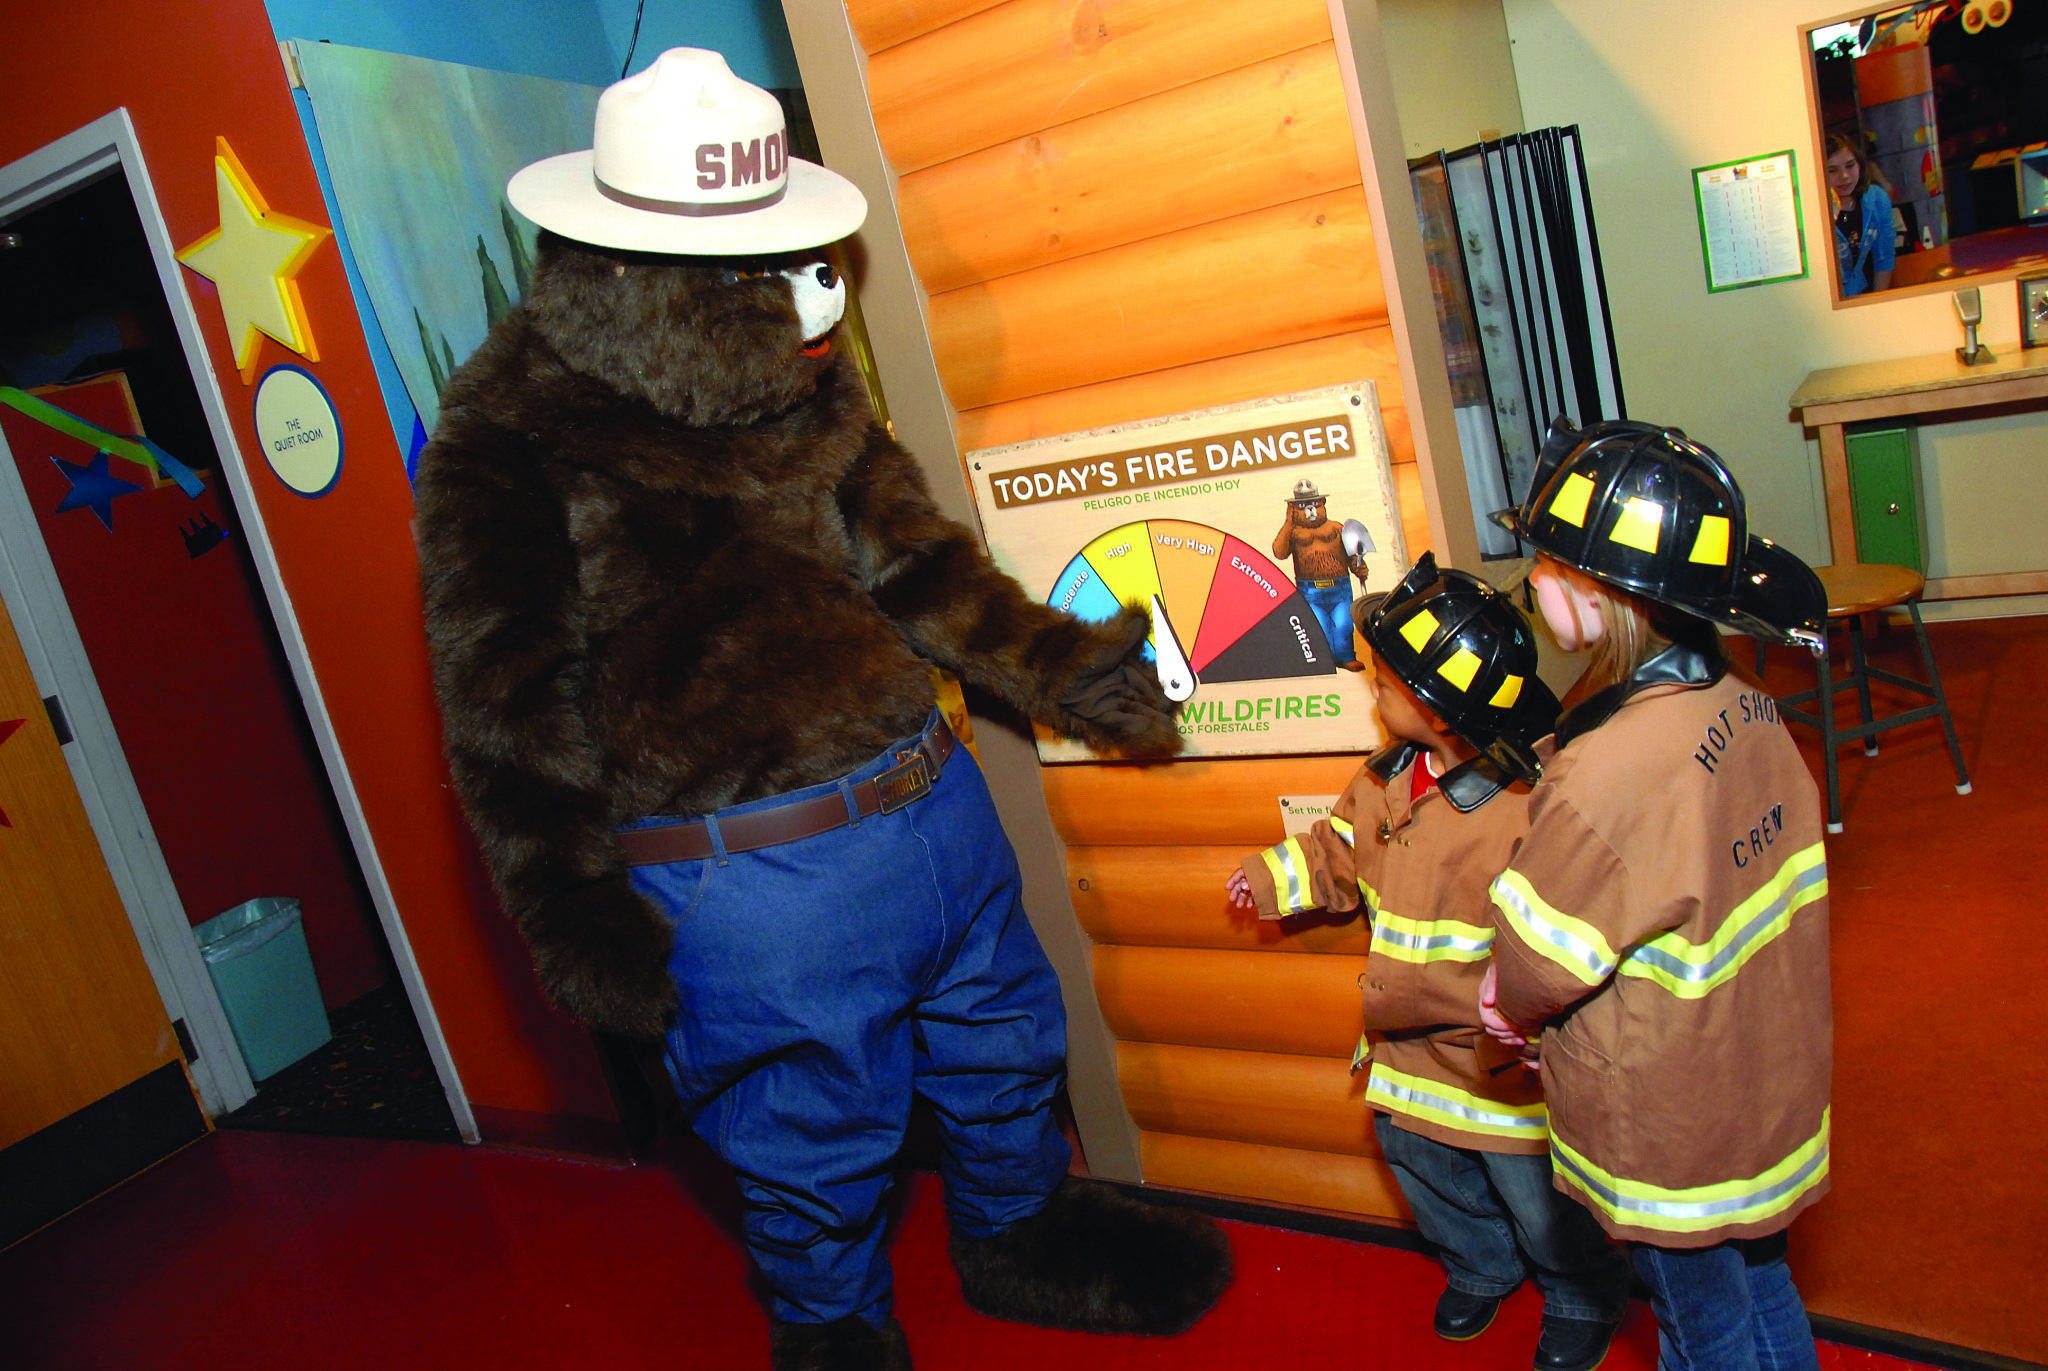 In 2009, the Betty Brinn Children's Museum partnered with the U.S. Forest Service to create a traveling exhibit to teach children about caring for their natural resources. 